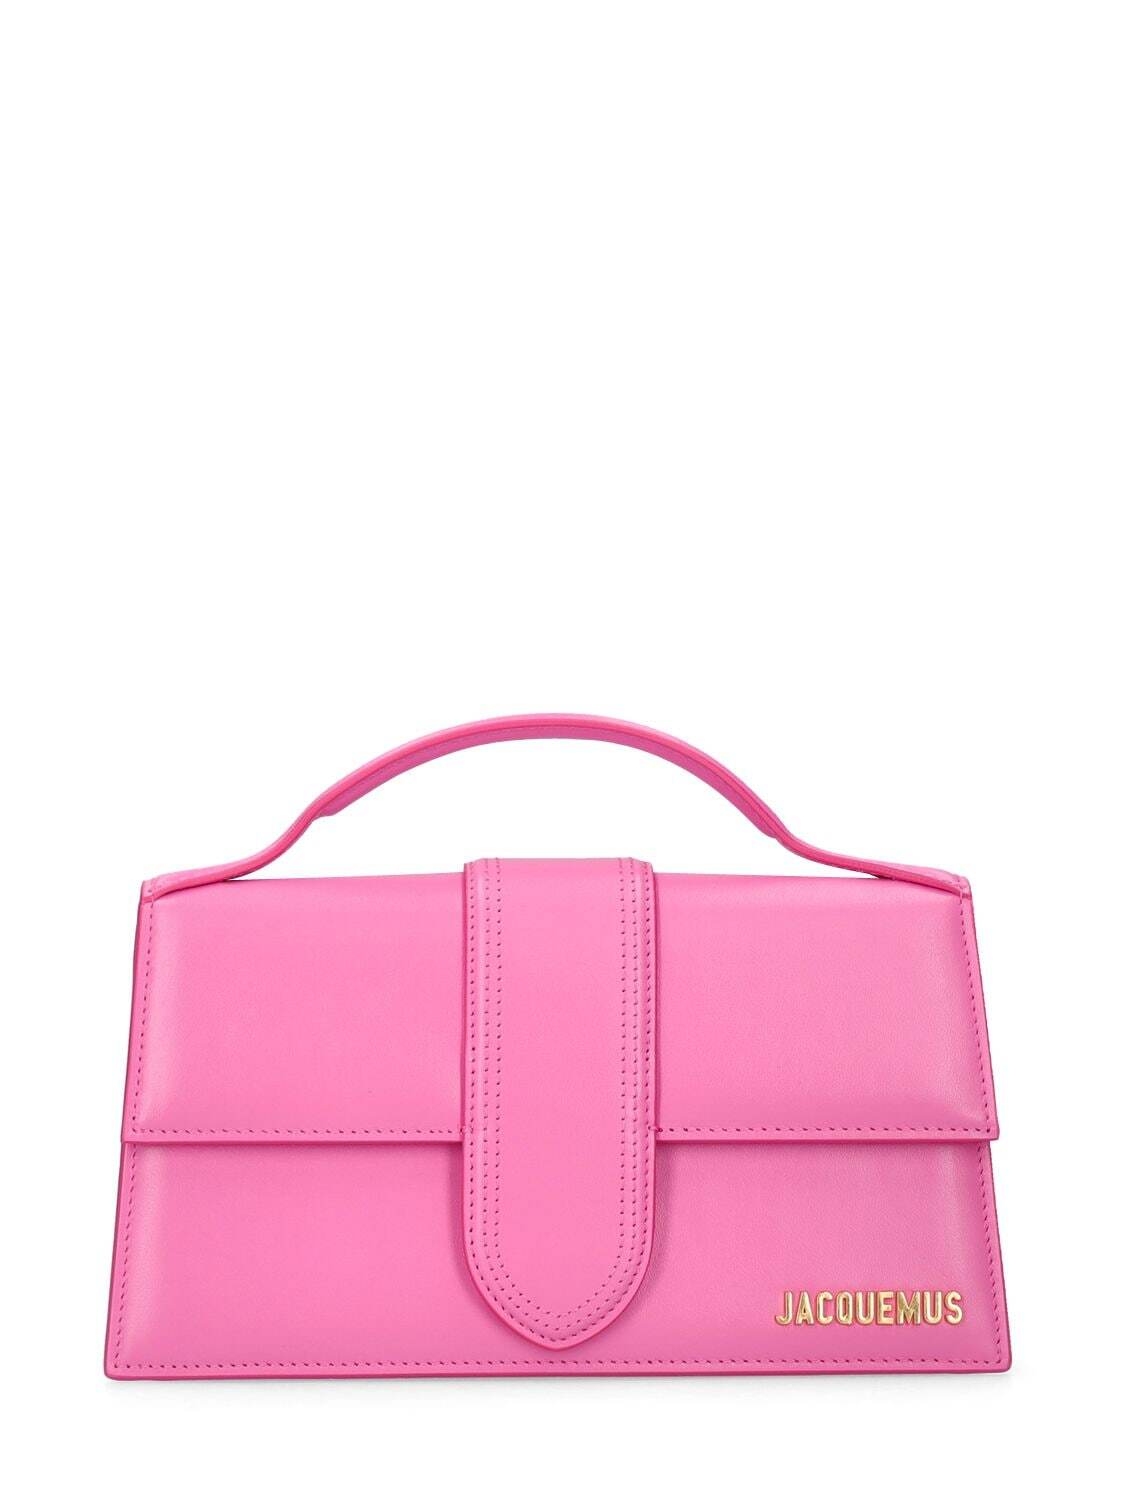 JACQUEMUS Le Grand Bambino Leather Top Handle Bag in pink